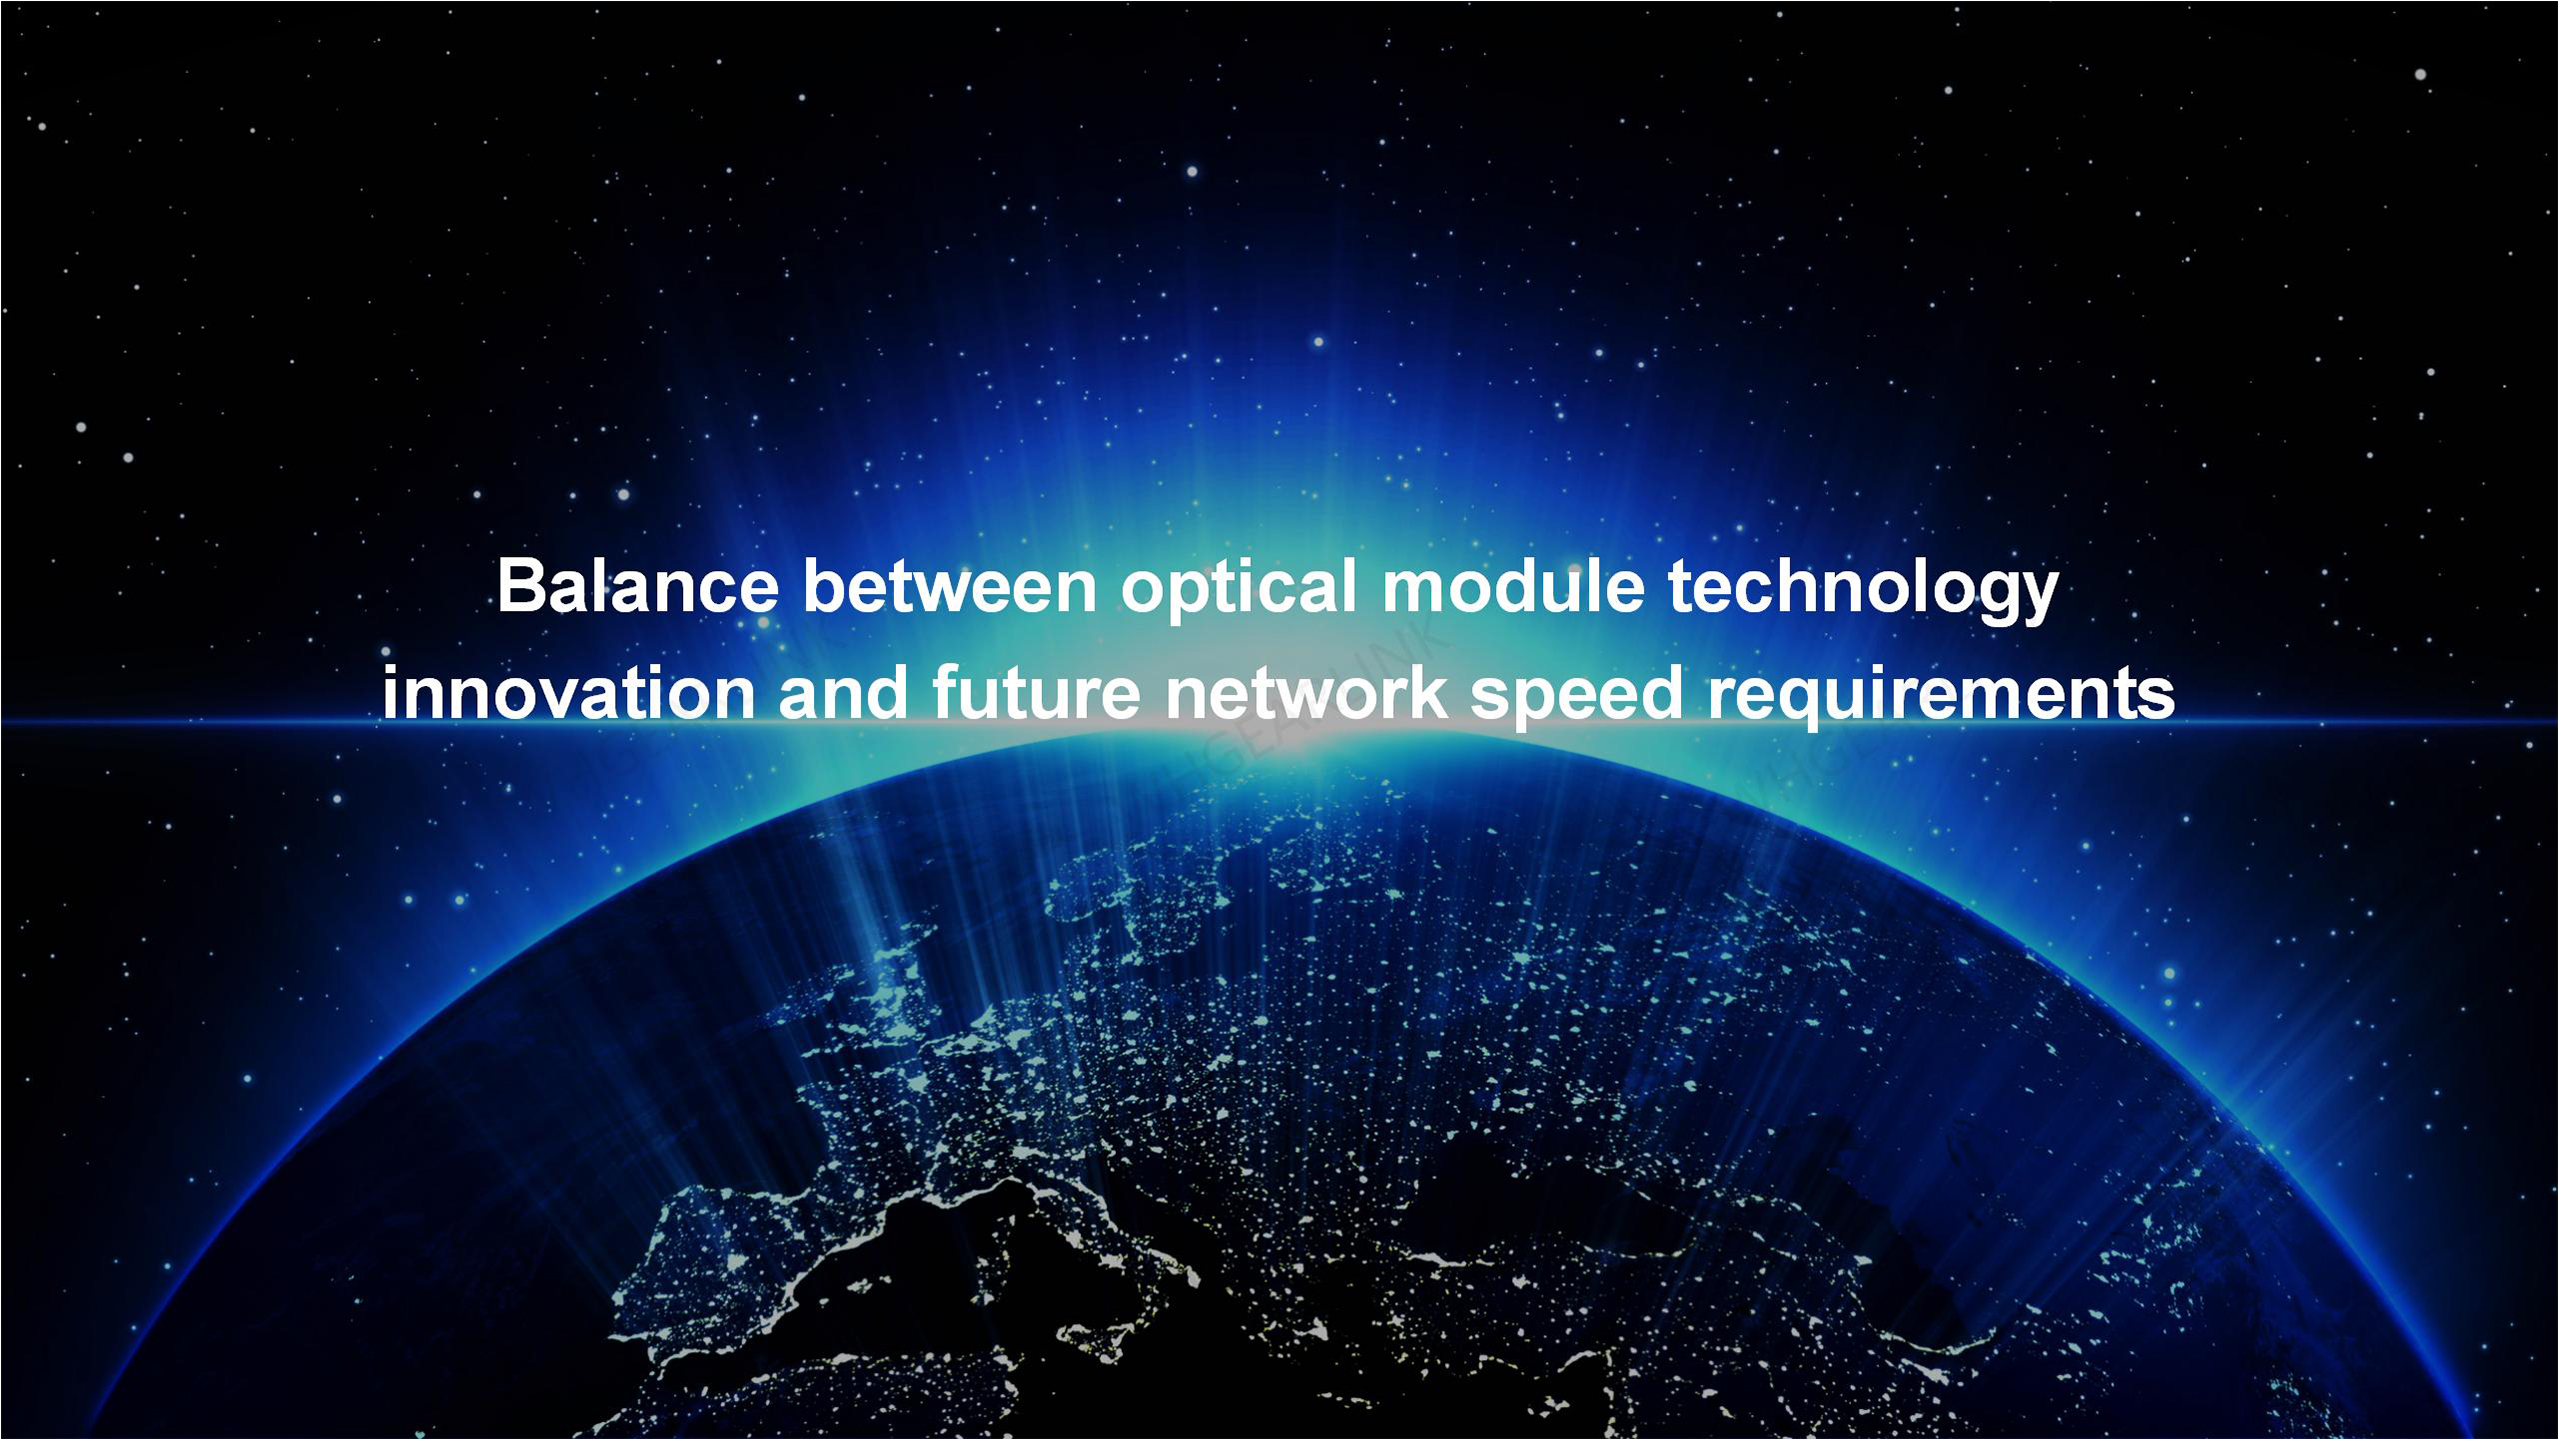 Balance_between_optical_module_technology_innovation_and_future_network_speed_requirements.jpg